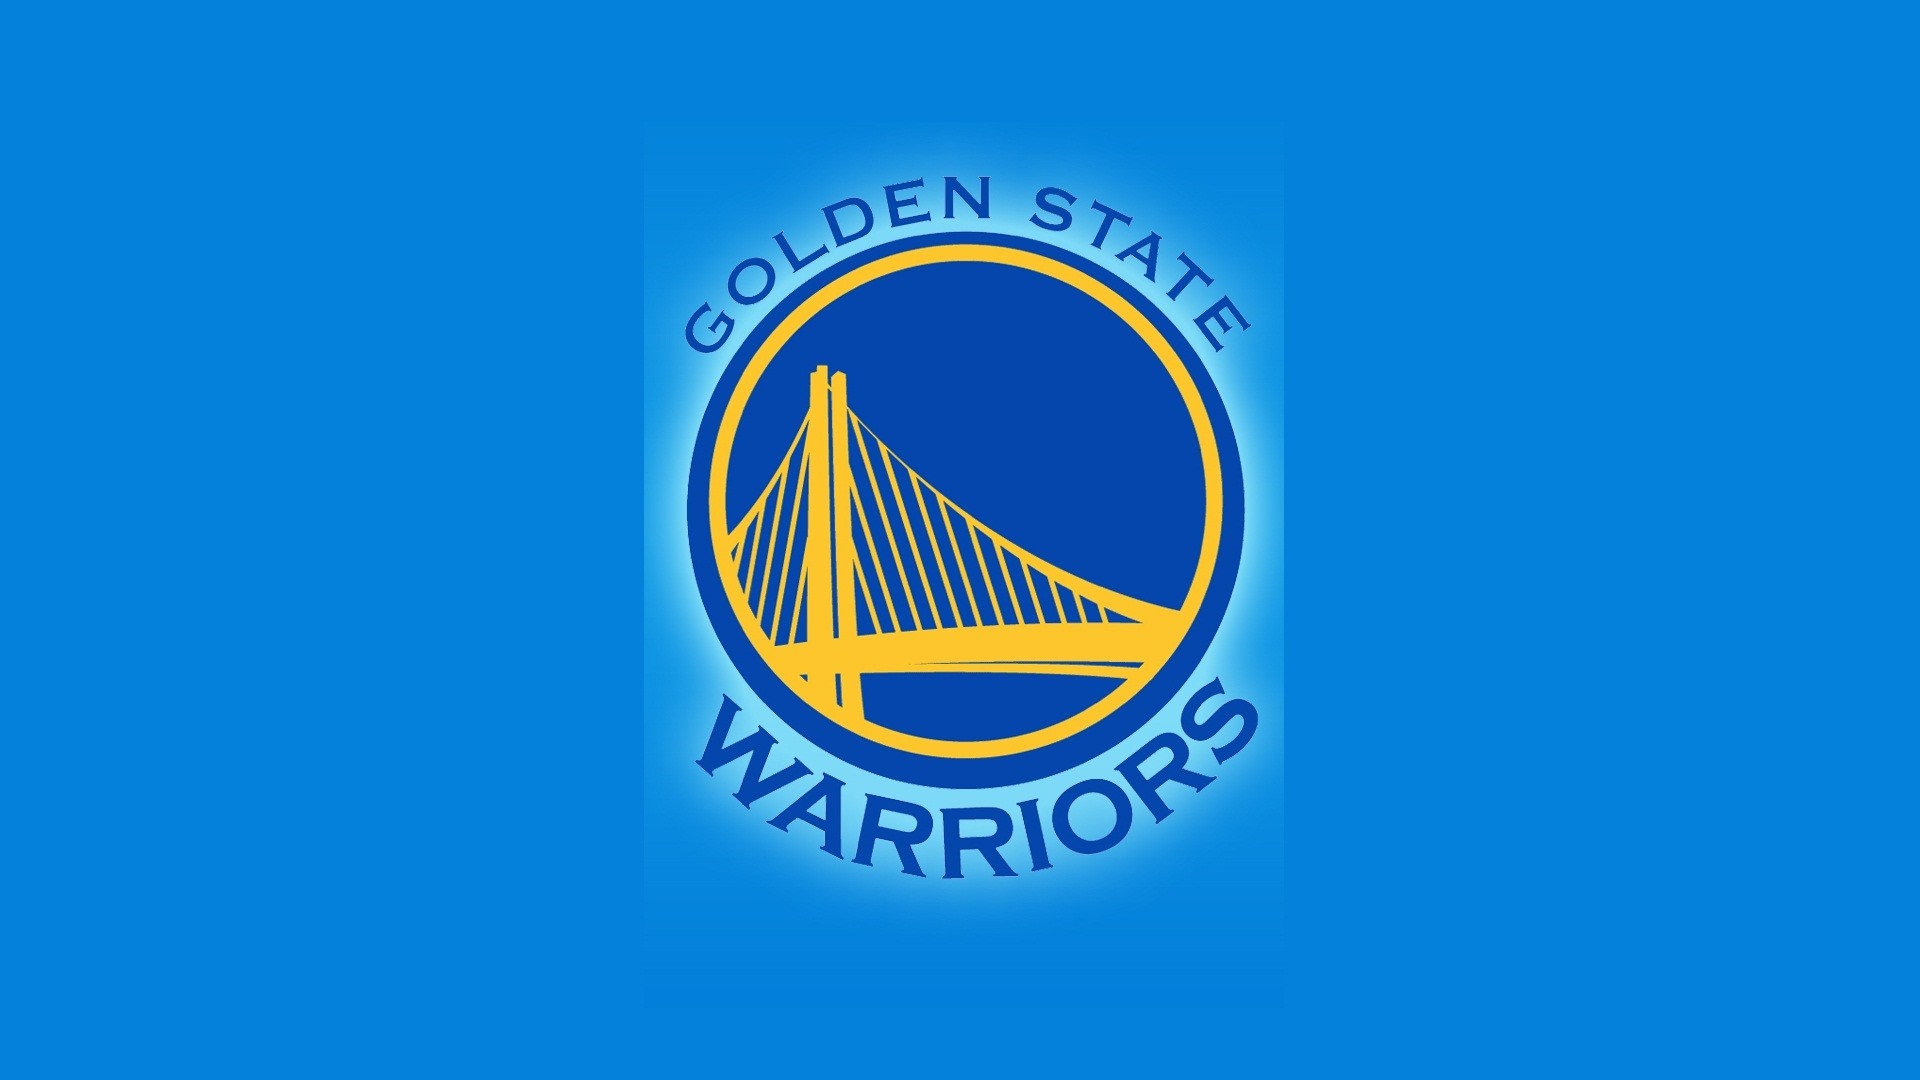 Golden State Warriors Logo Desktop Wallpaper with image dimensions 1920x1080 pixel. You can make this wallpaper for your Desktop Computer Backgrounds, Windows or Mac Screensavers, iPhone Lock screen, Tablet or Android and another Mobile Phone device